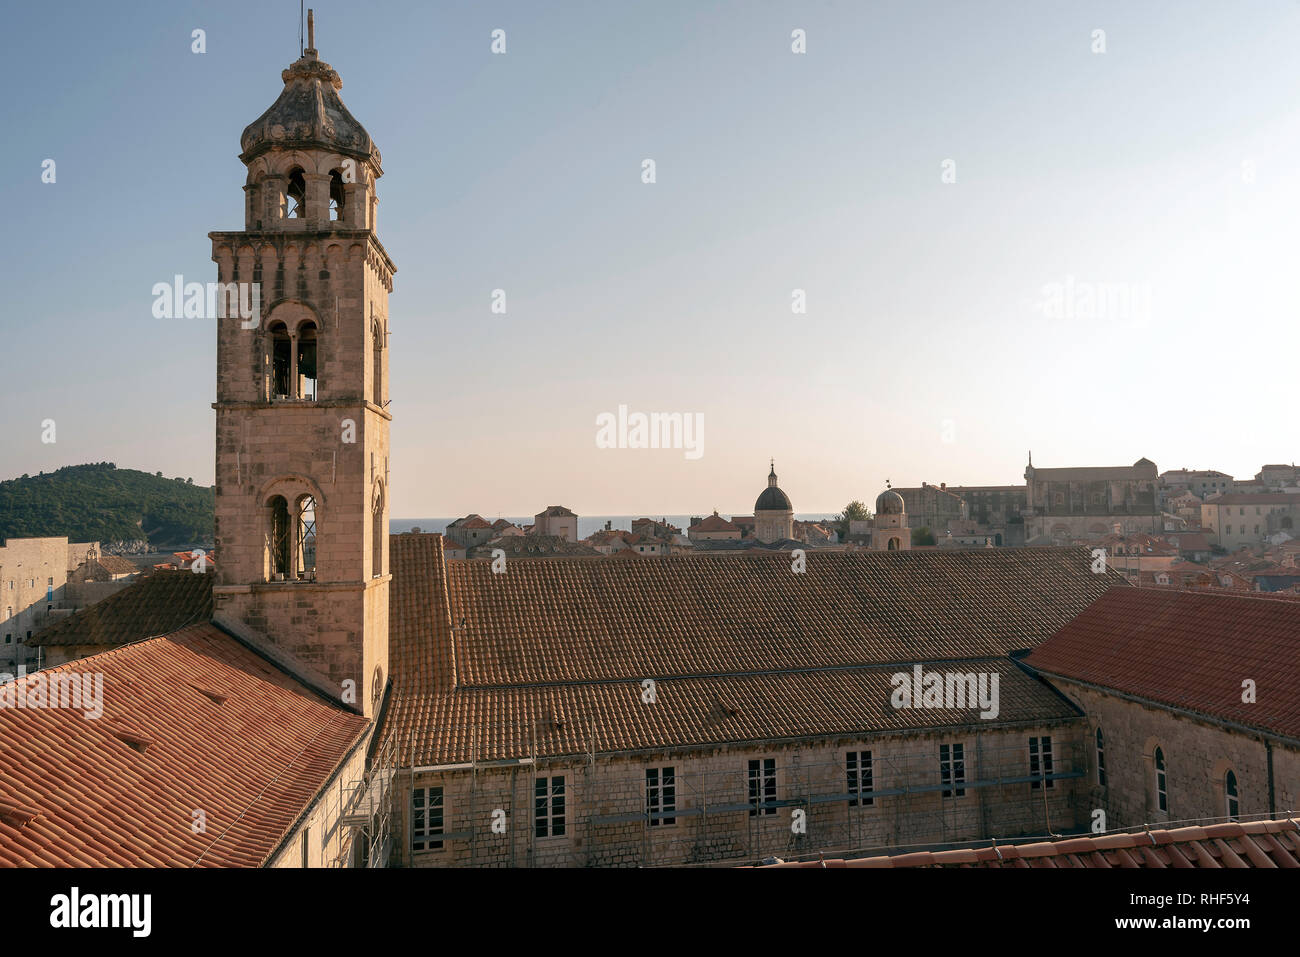 The Dominican Monastery in Dubrovnik's old town Stock Photo